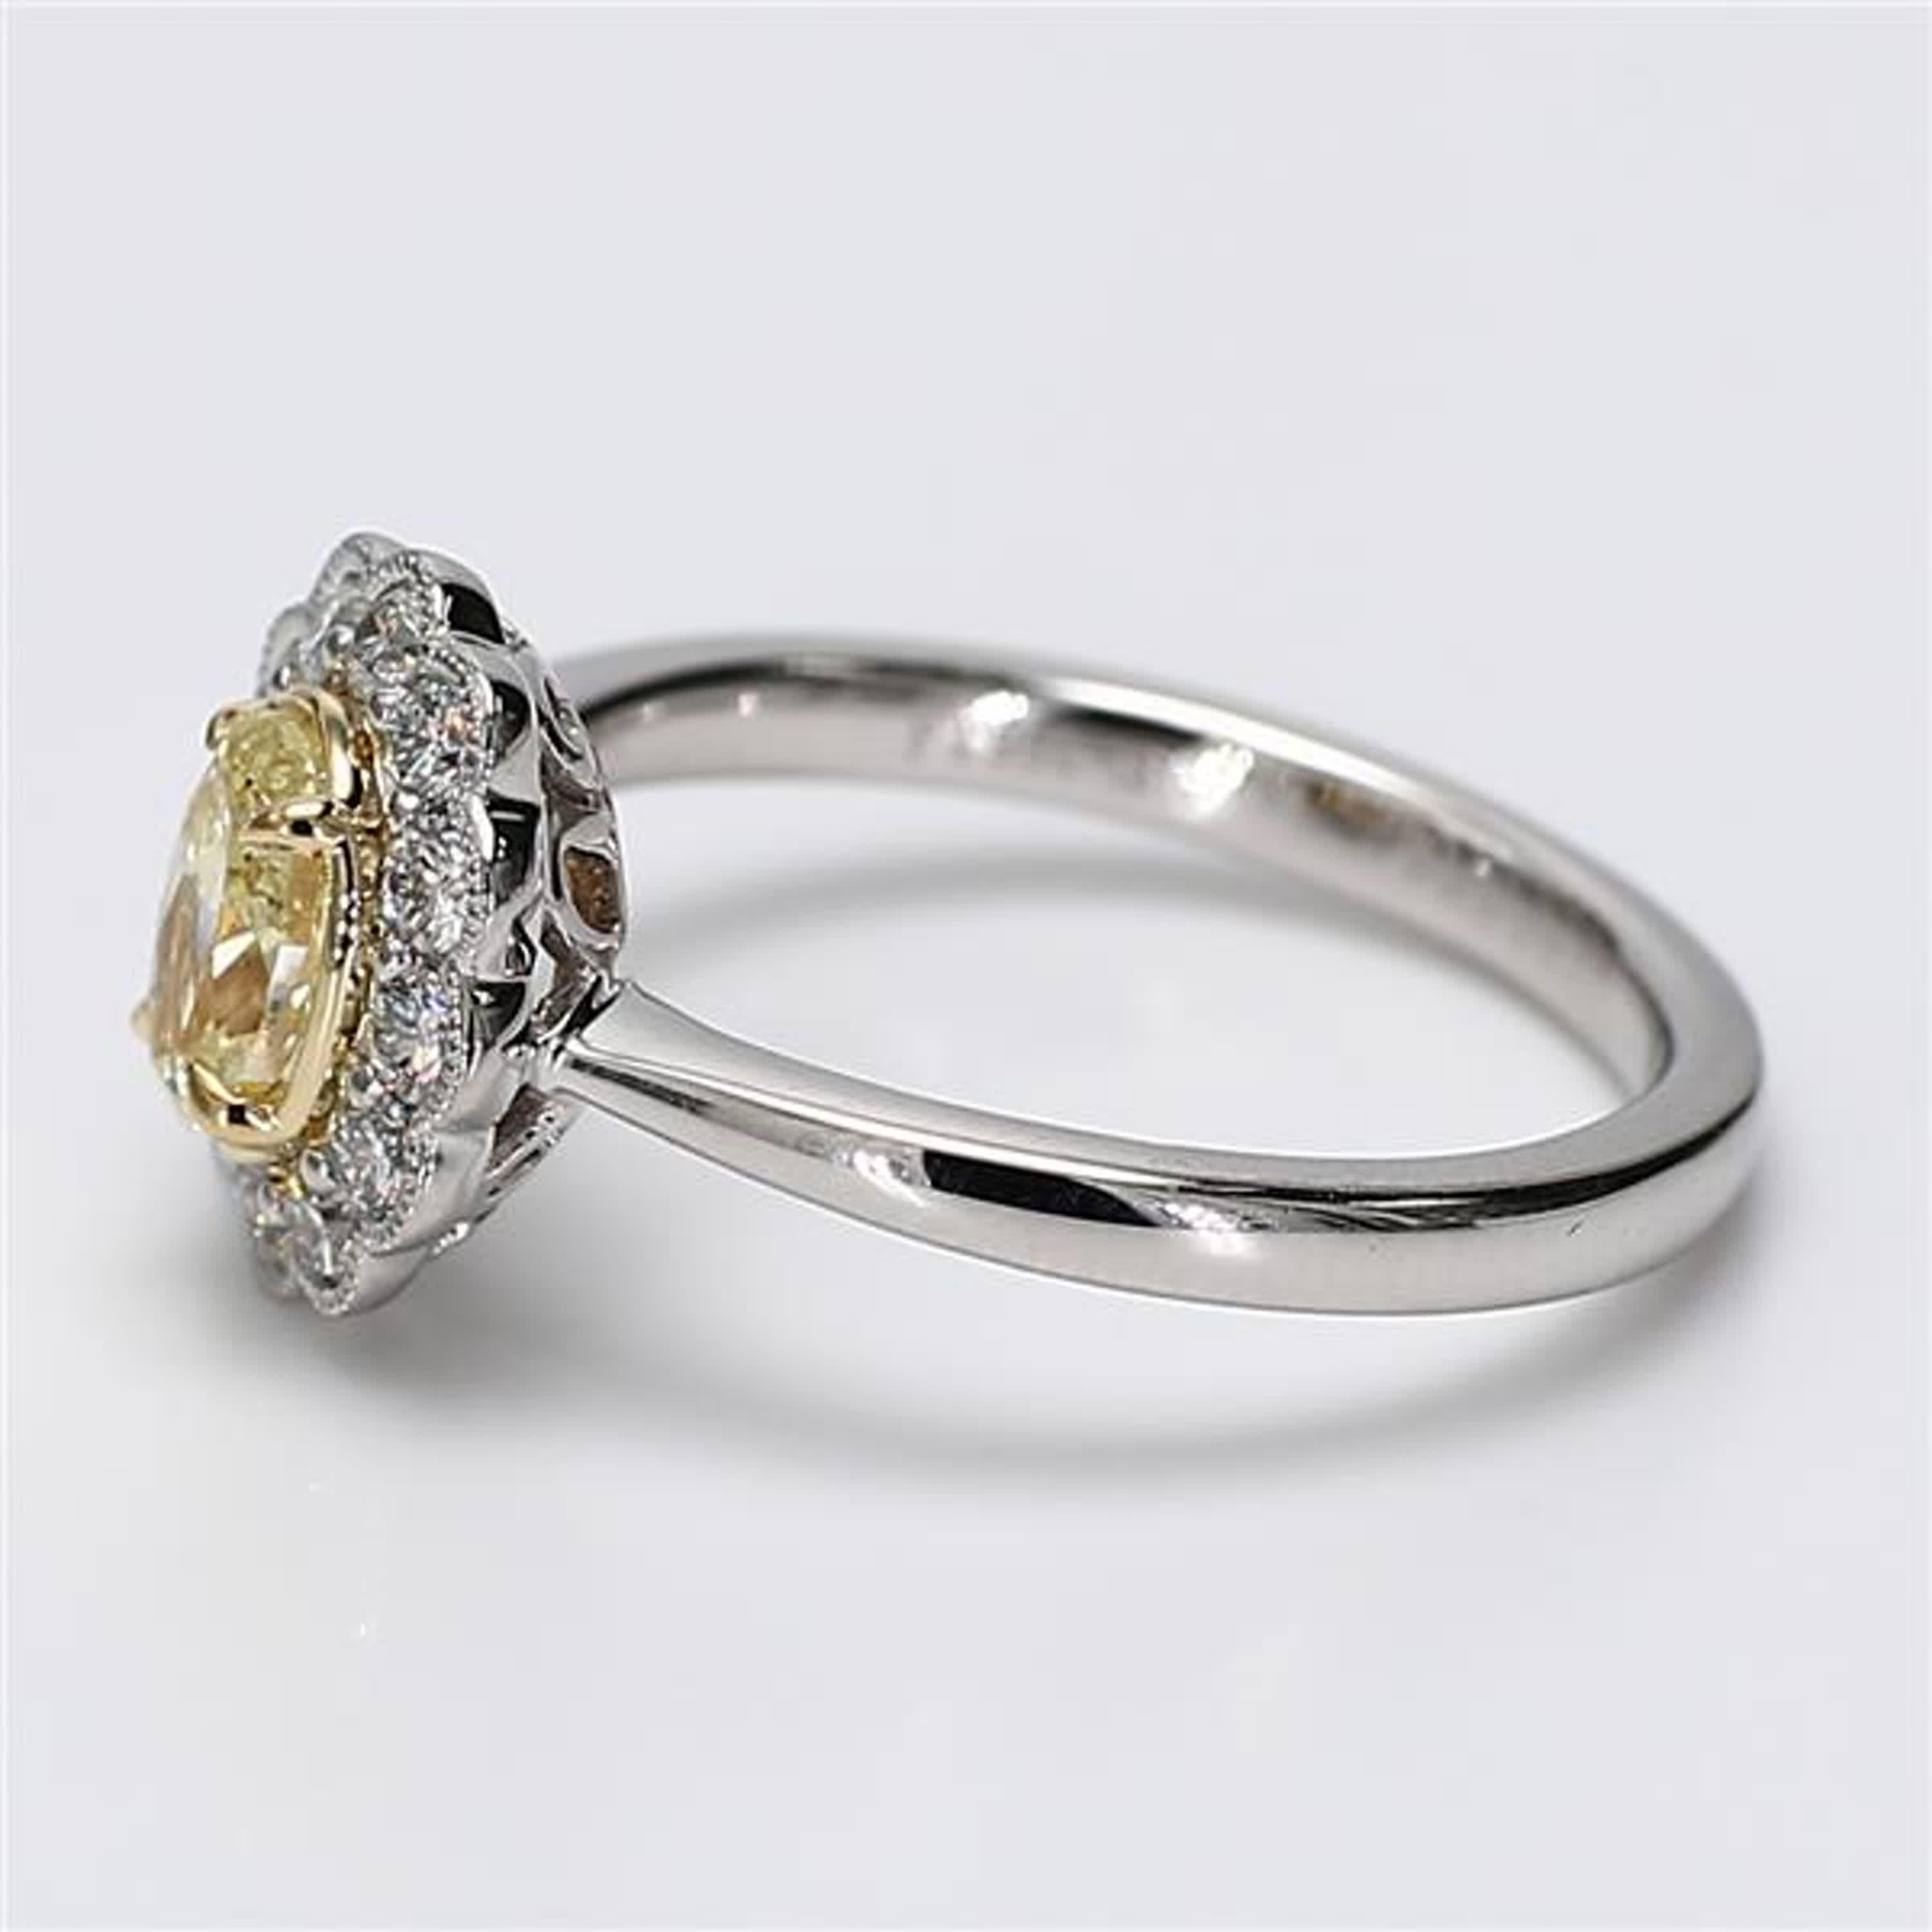 RareGemWorld's classic diamond ring. Mounted in a beautiful Platinum/18K Yellow and White Gold setting with a natural oval cut yellow diamond. The yellow diamond is surrounded by round natural white diamond melee. This ring is guaranteed to impress